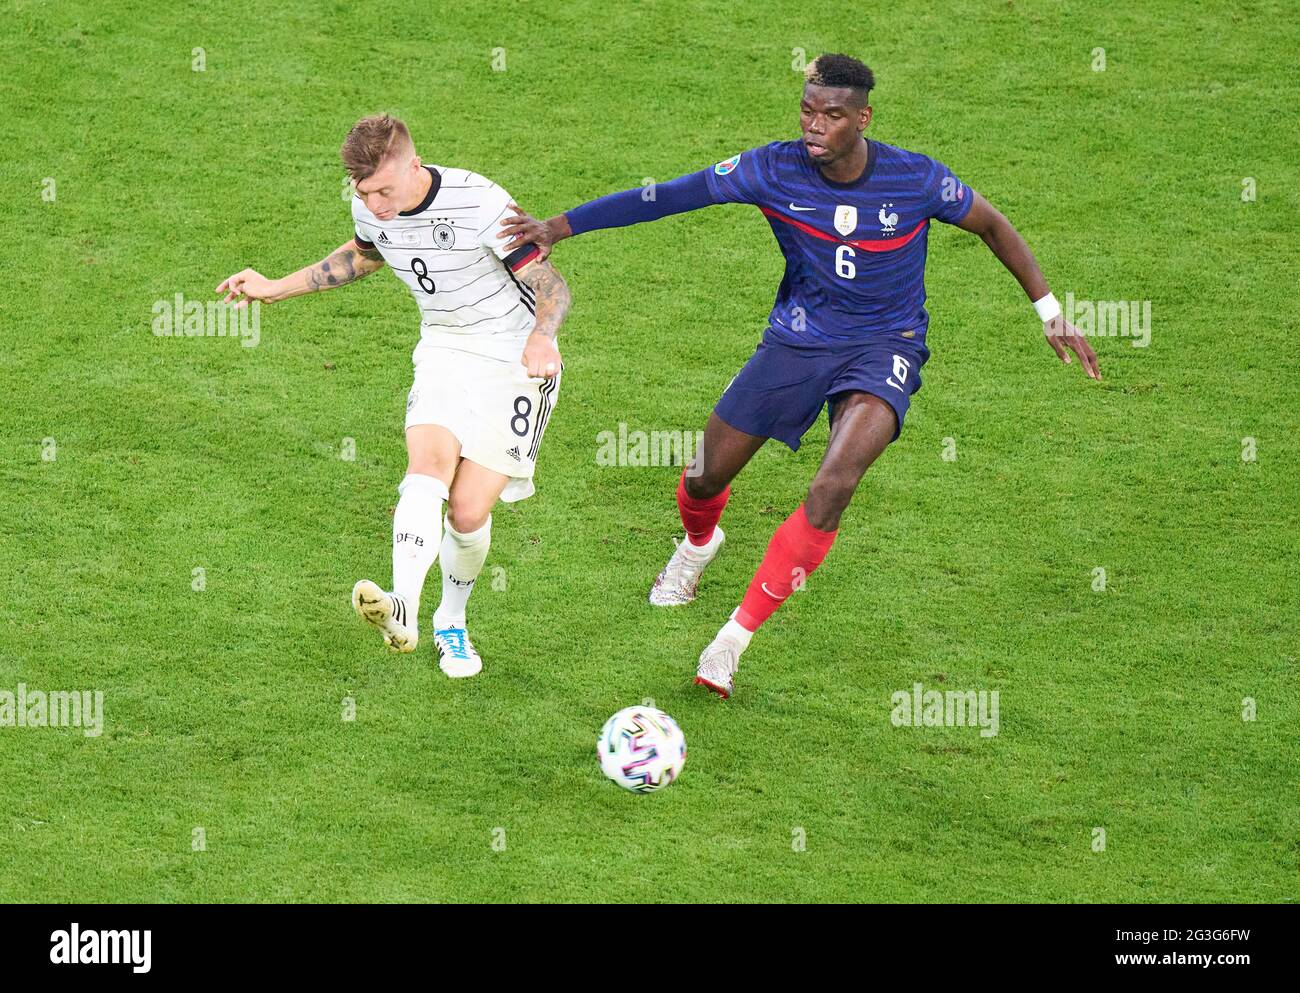 Toni Kroos, DFB 8  compete for the ball, tackling, duel, header, zweikampf, action, fight against Paul POGBA, FRA 6  in the Group F match FRANCE - GERMANY  1-0 at the football UEFA European Championships 2020 in Season 2020/2021 on June 15, 2021  in Munich, Germany. © Peter Schatz / Alamy Live News Stock Photo